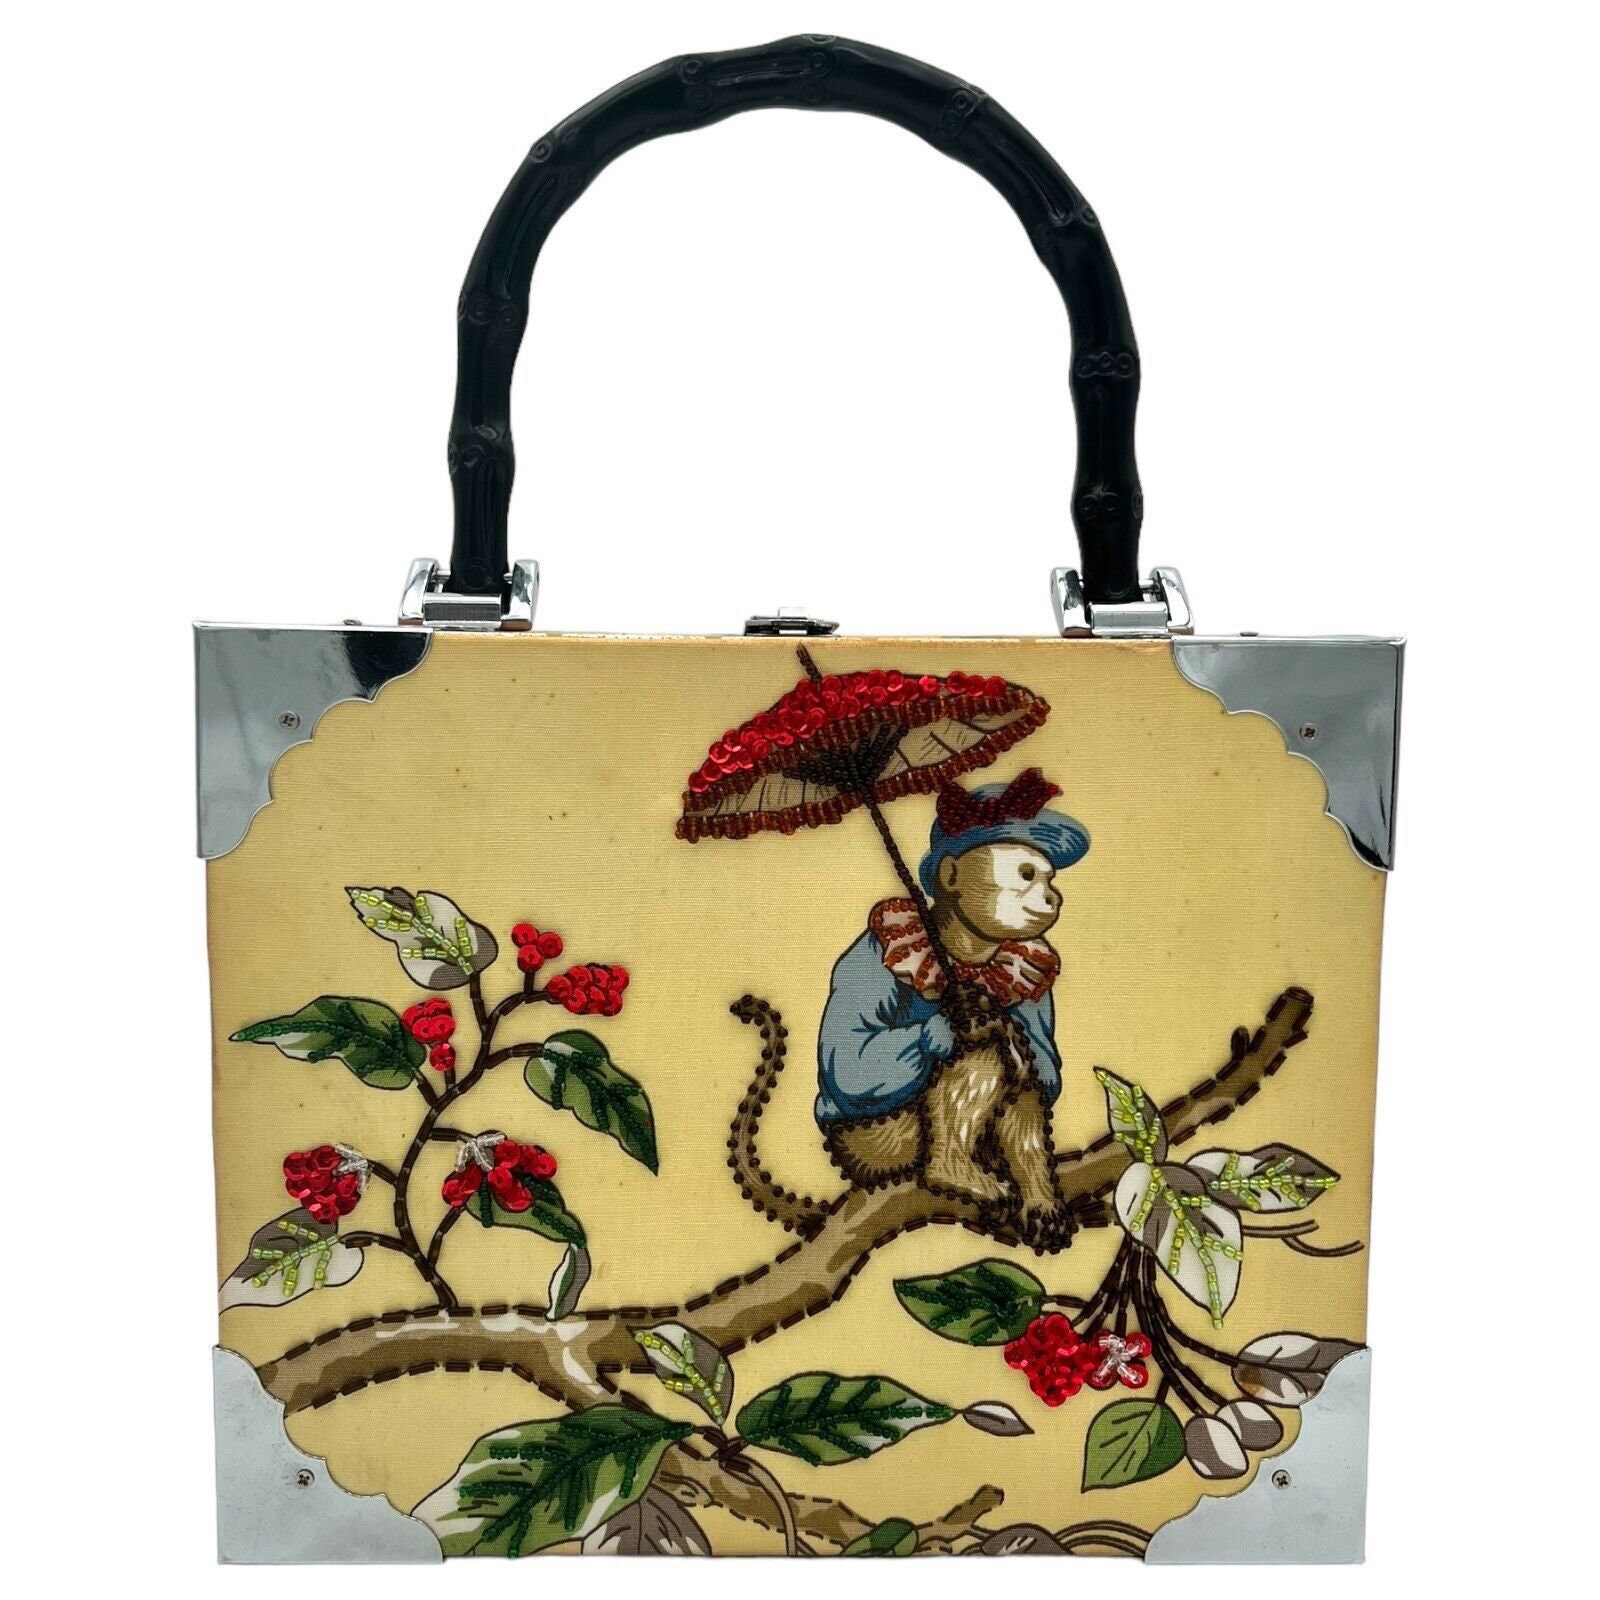 Finds: Novelty handbags from BLT Boutique can liven wardrobe